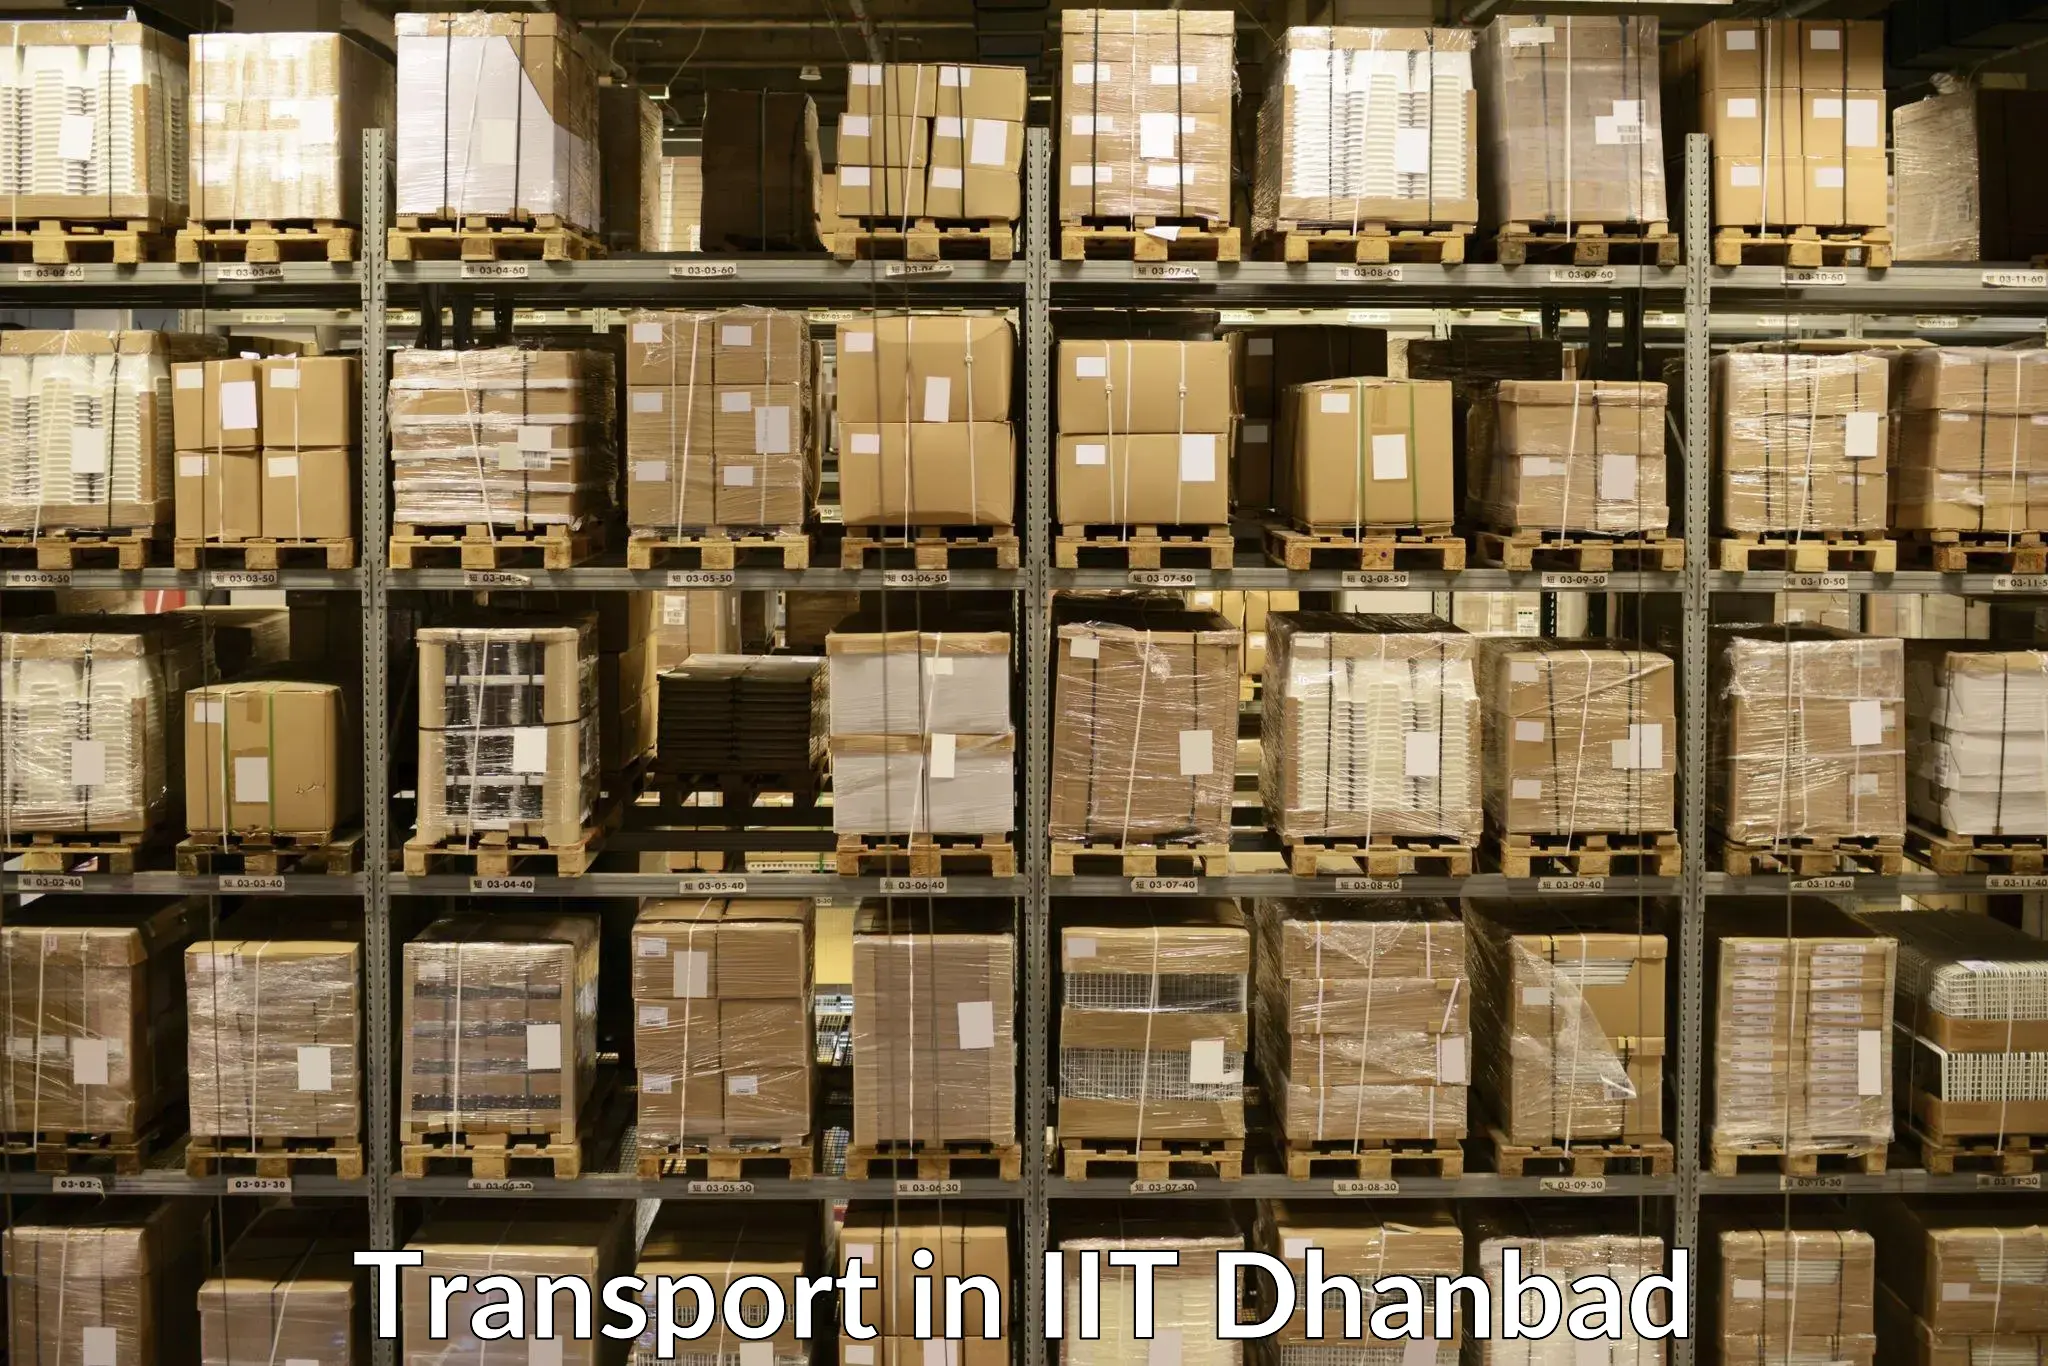 Transport shared services in IIT Dhanbad